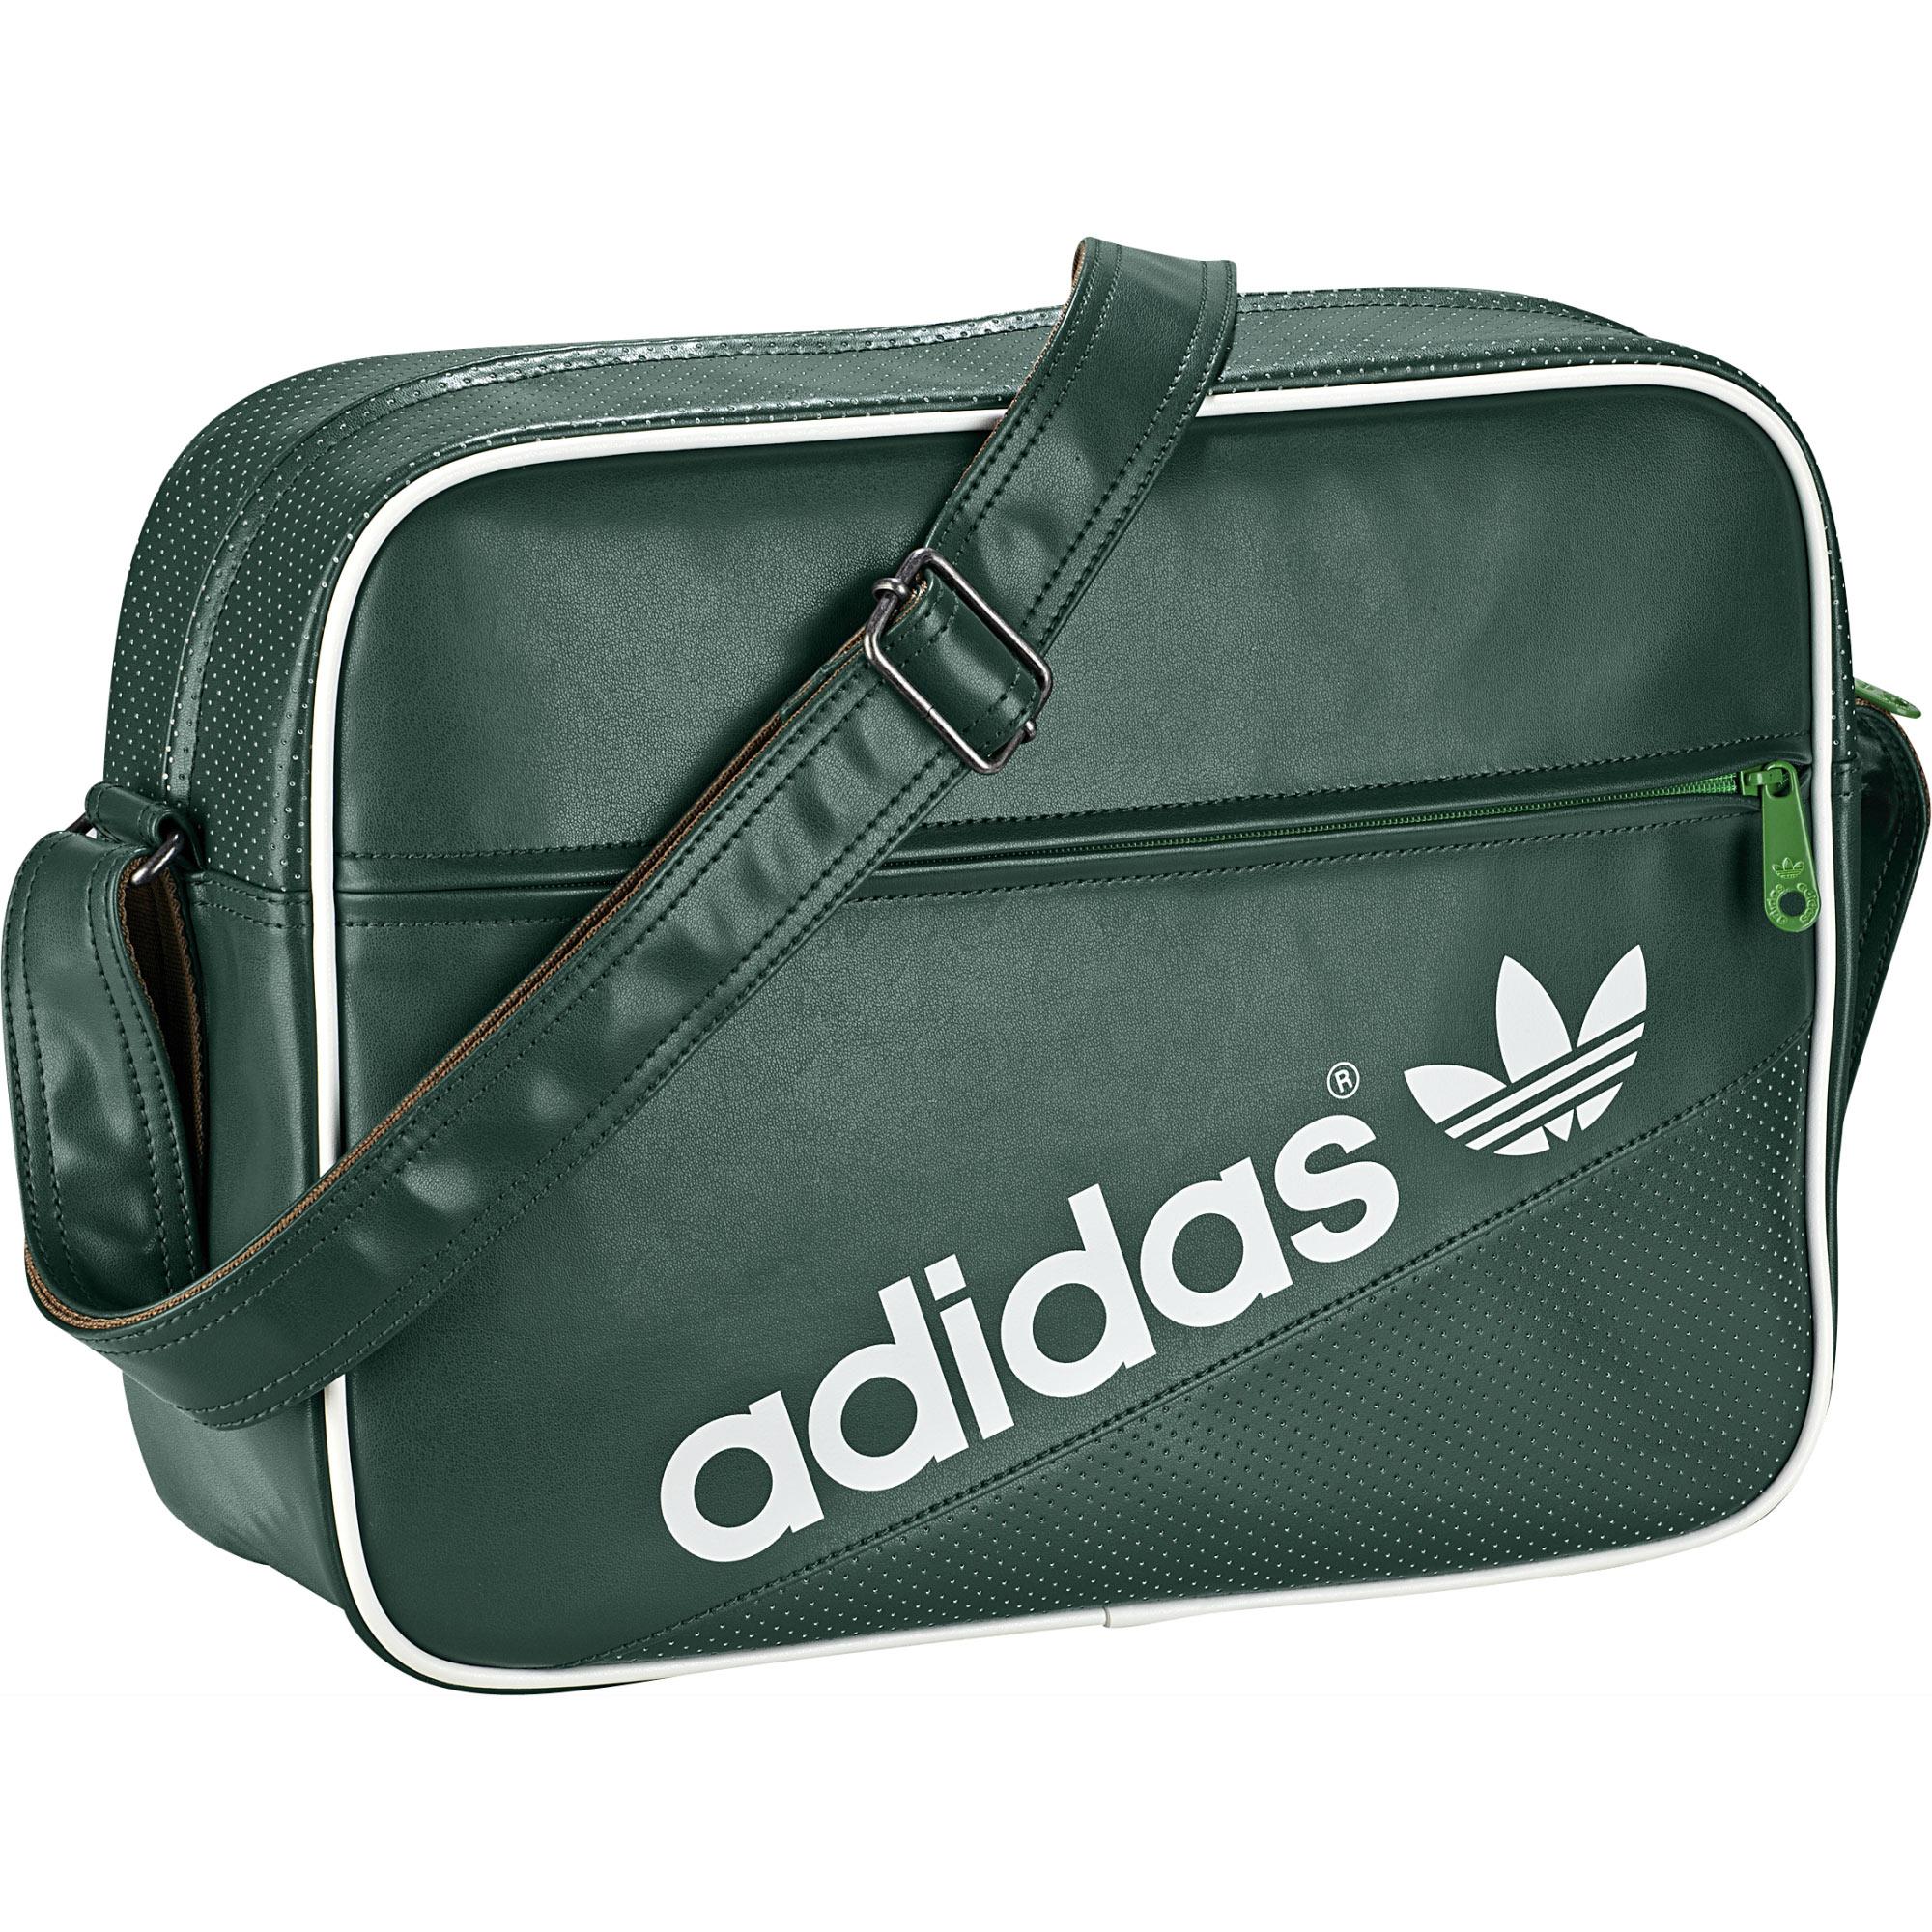 Foto adidas bolso Perforated Airline Hombre foto 792490